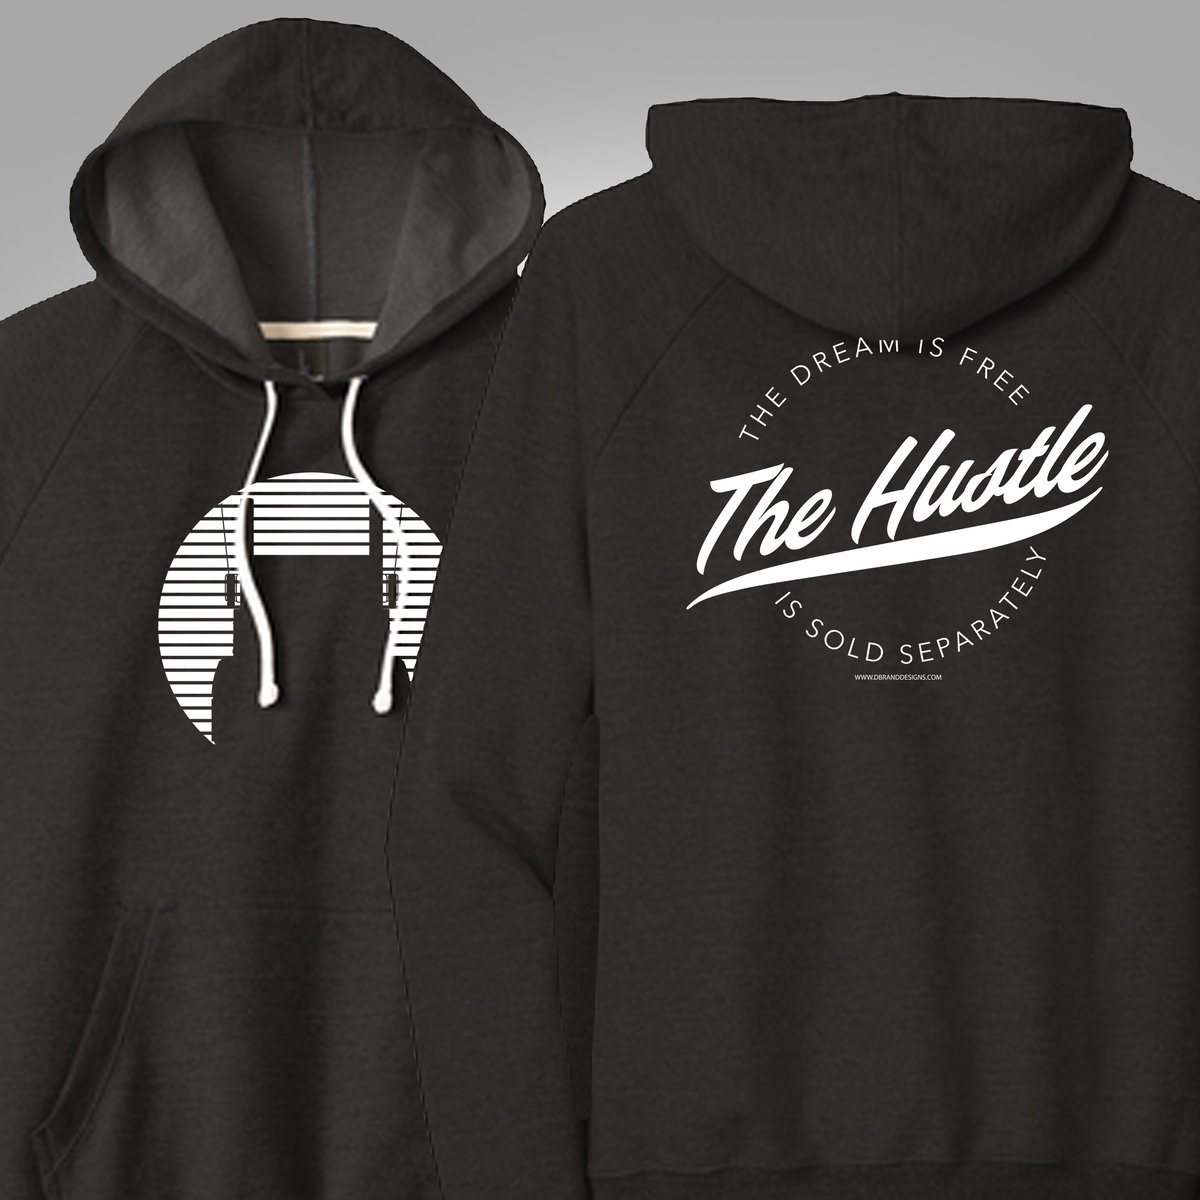 https://assets.bigcartel.com/product_images/278089265/The+Hustle+Hoodie+Mockup.jpg?auto=format&fit=max&h=1200&w=1200